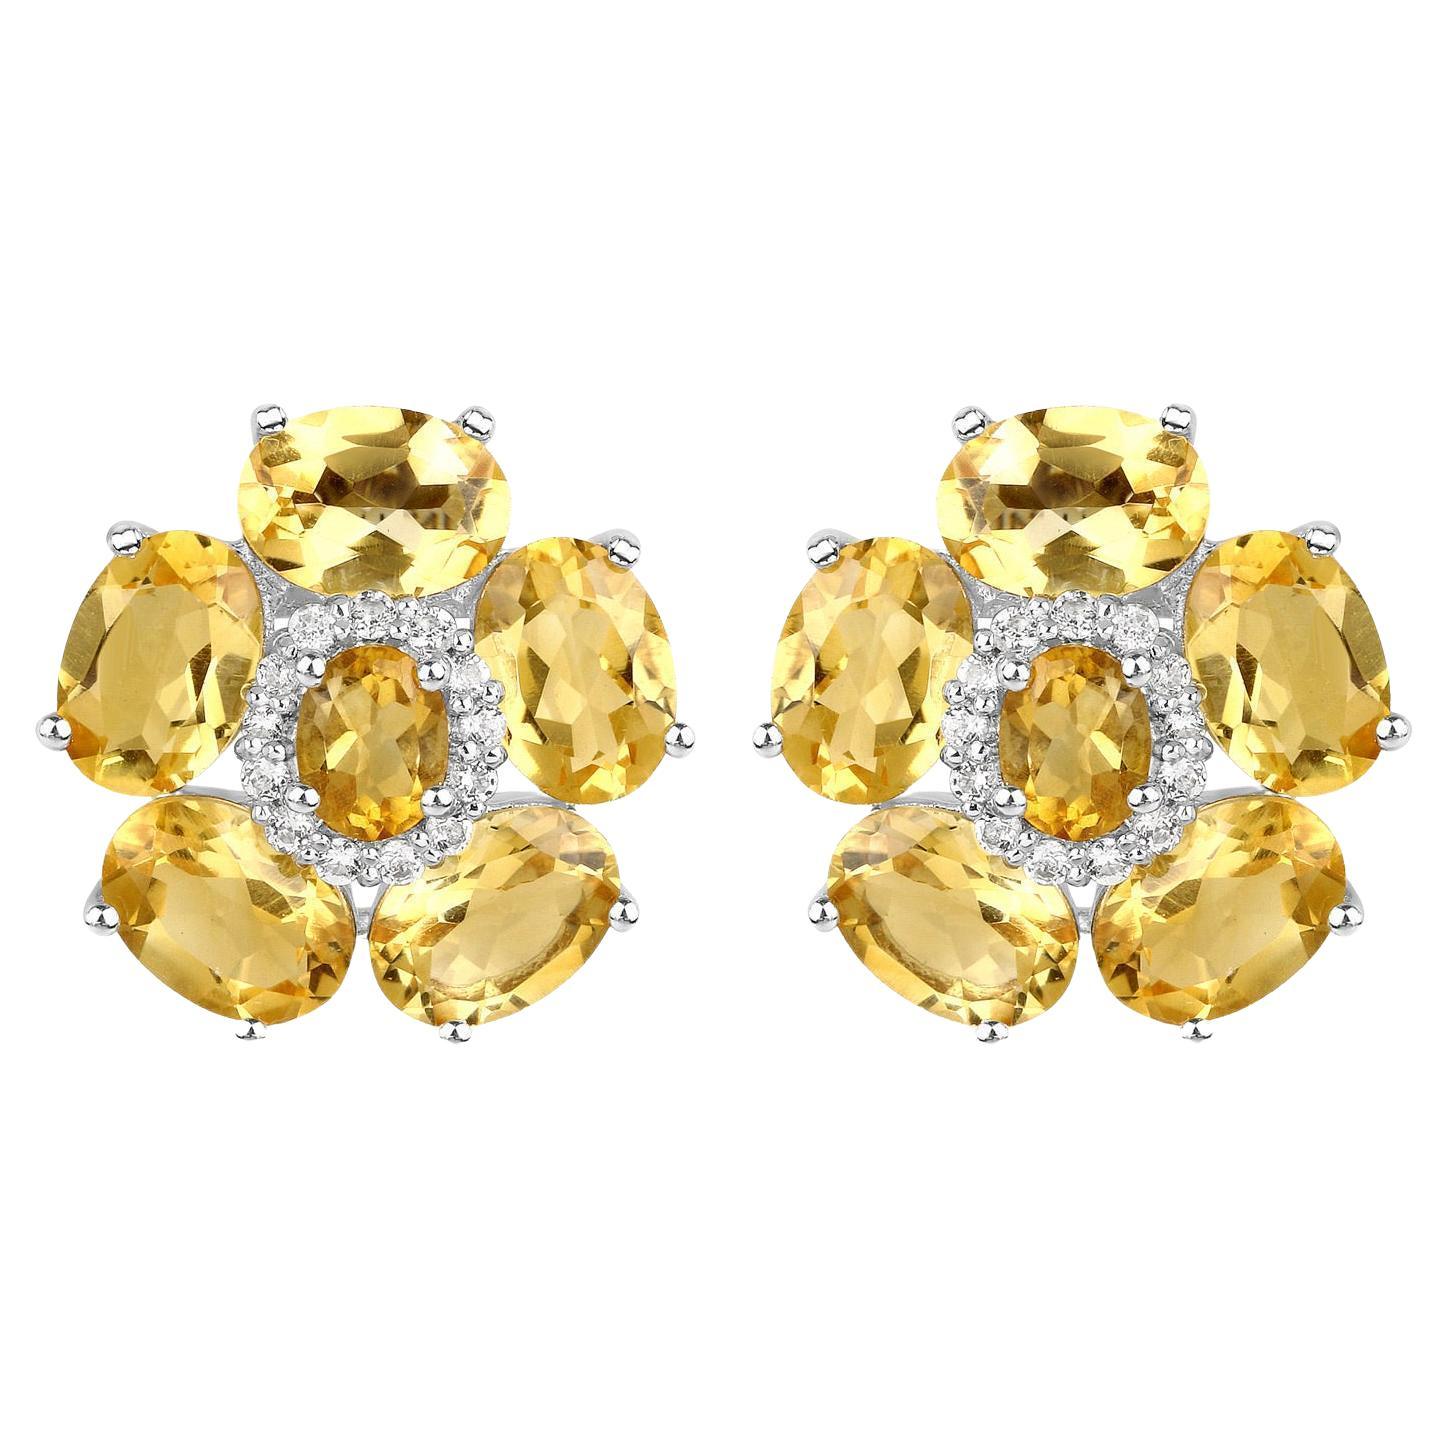 Natural Citrine and White Topaz Floral Earrings 8.9 Carats Total